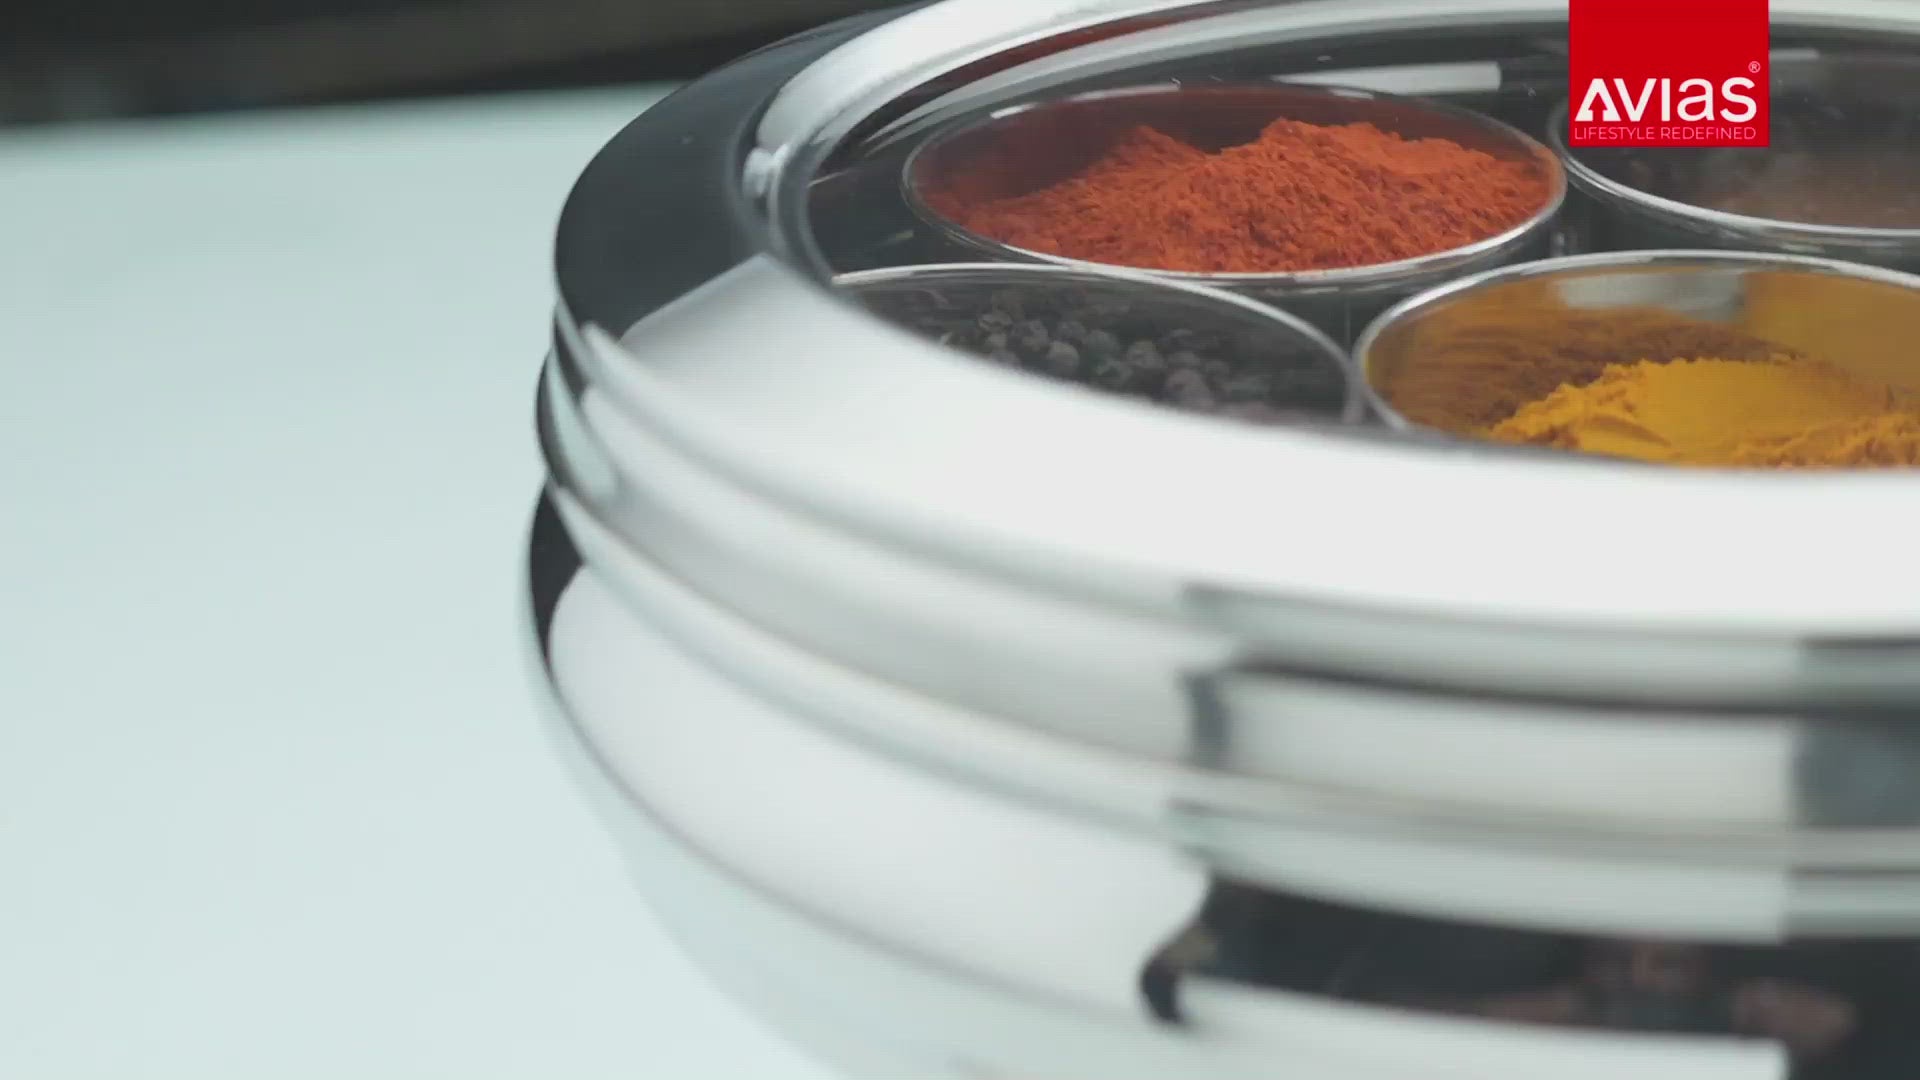 AVIAS Stainless steel Deluxe Spice box with See-through lid